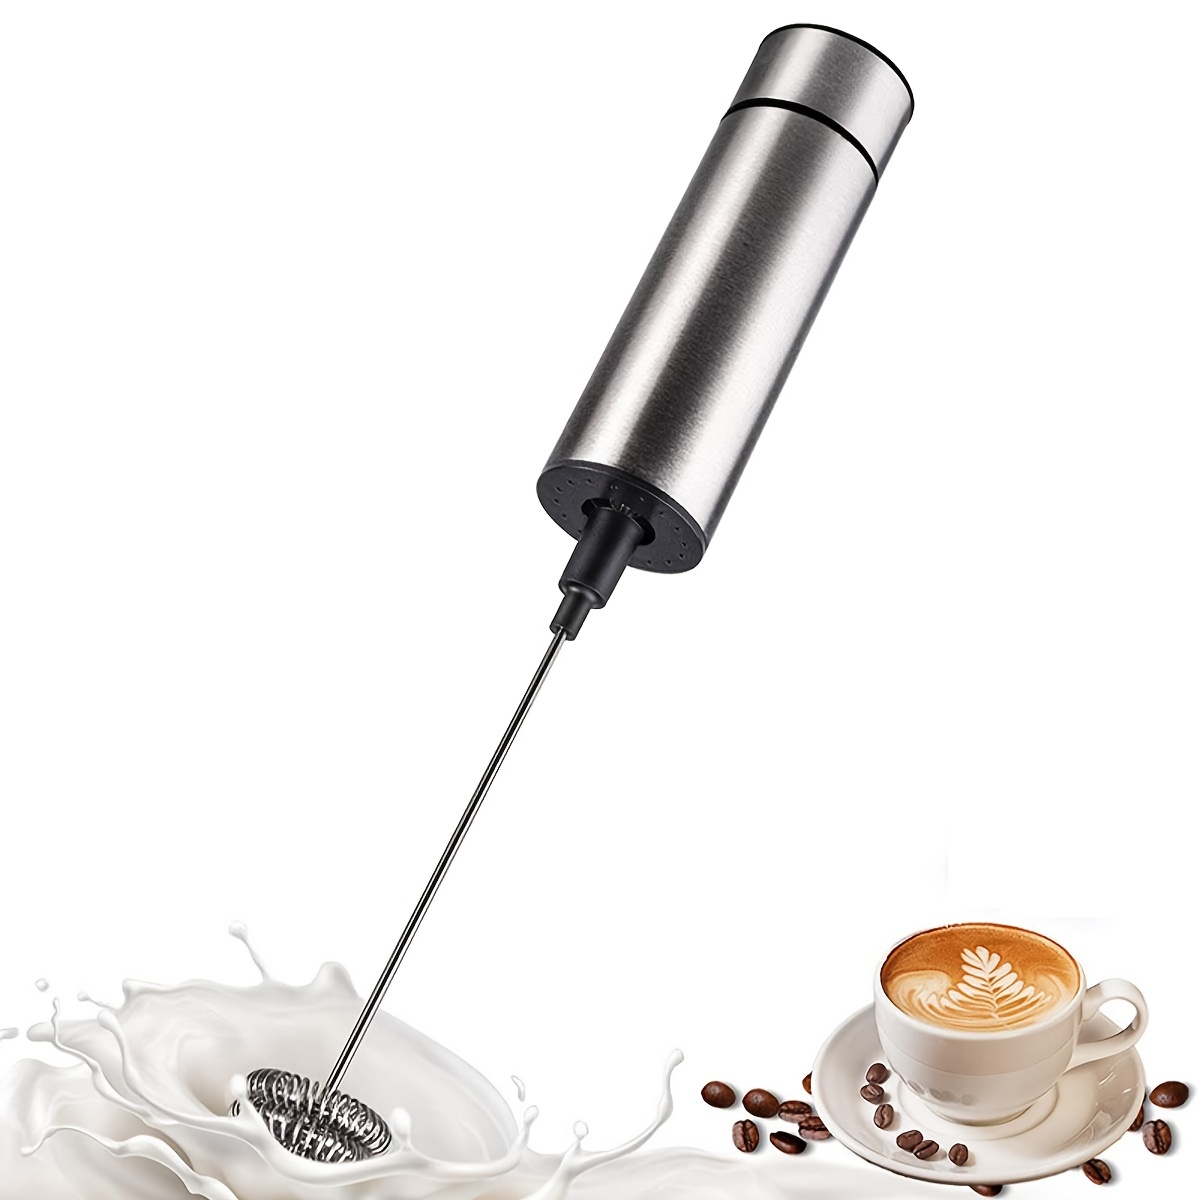  YUSWKO Rechargeable Milk Frother Handheld with 3 Heads, Silver  Coffee Electric Whisk Drink Foam Mixer, Mini Hand Stirrer with 3 Speeds  Adjustable for Latte, Cappuccino, Hot Chocolate, Egg: Home & Kitchen